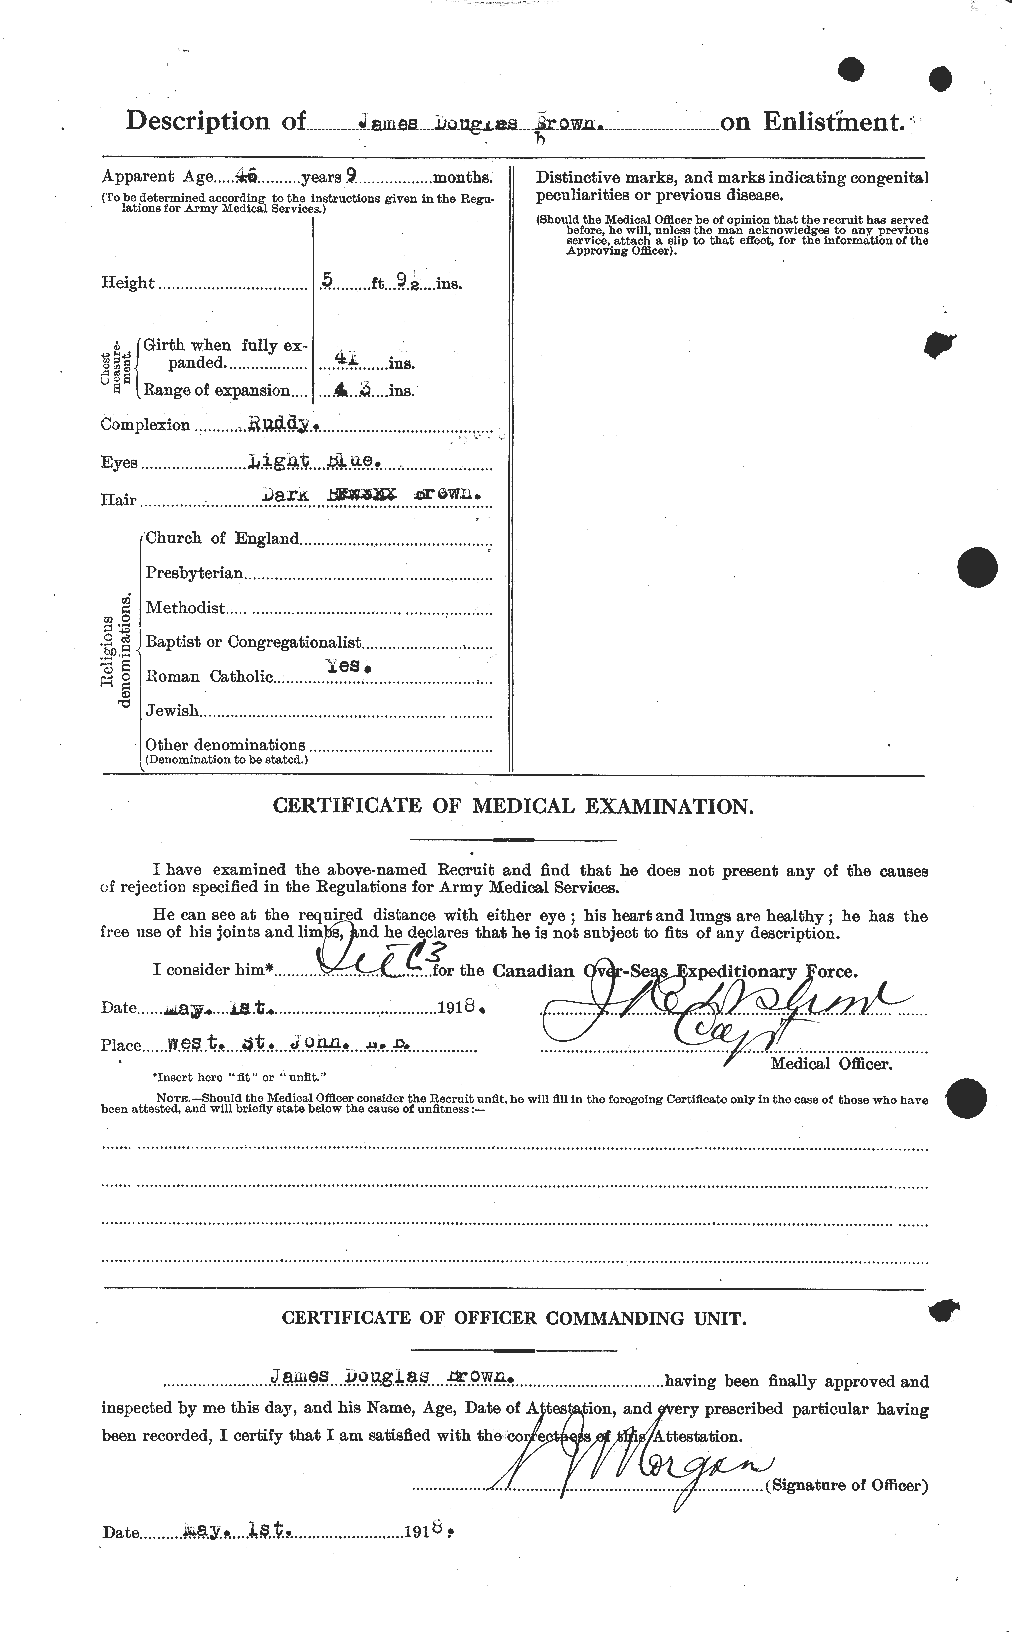 Personnel Records of the First World War - CEF 265812b